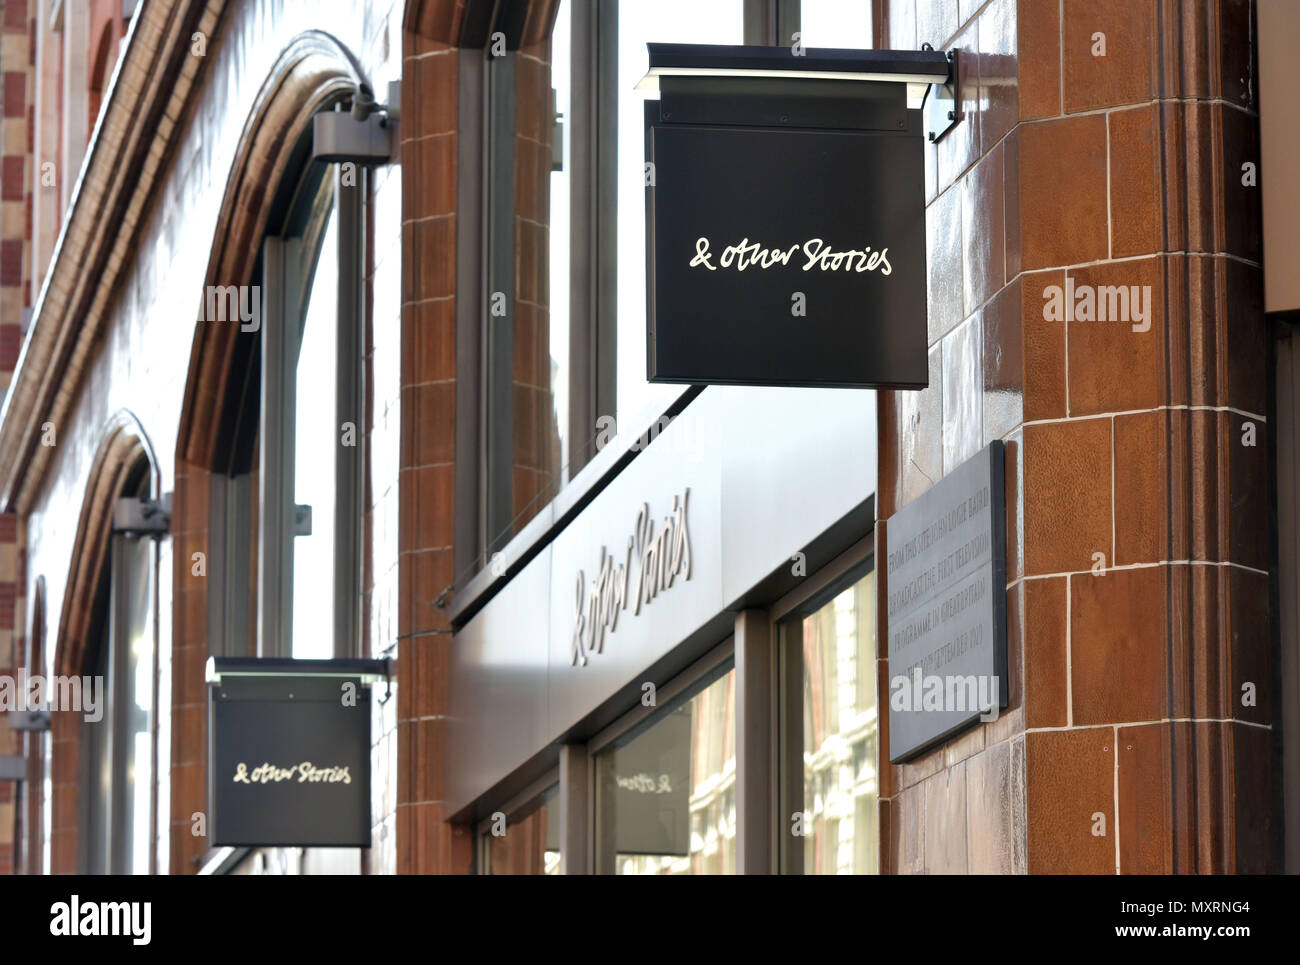 The brand logo of the H&M Group women’s clothing retailer & Other Stories, in Covent Garden, London. Stock Photo